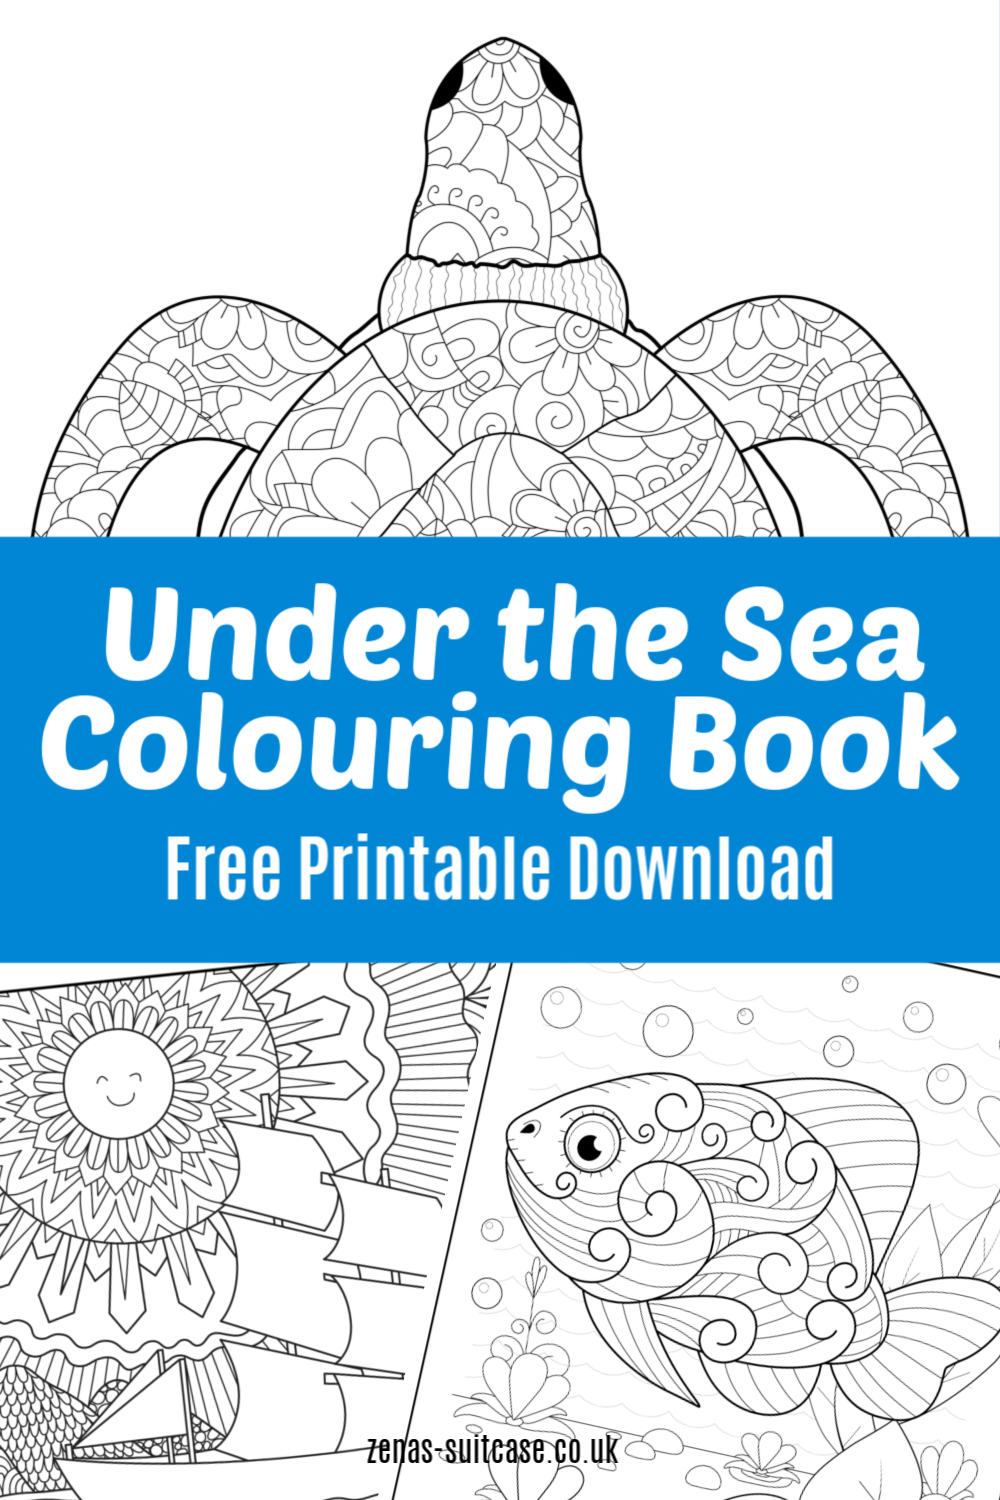 Ocean & Under the Sea Colouring Book - Free printable download 